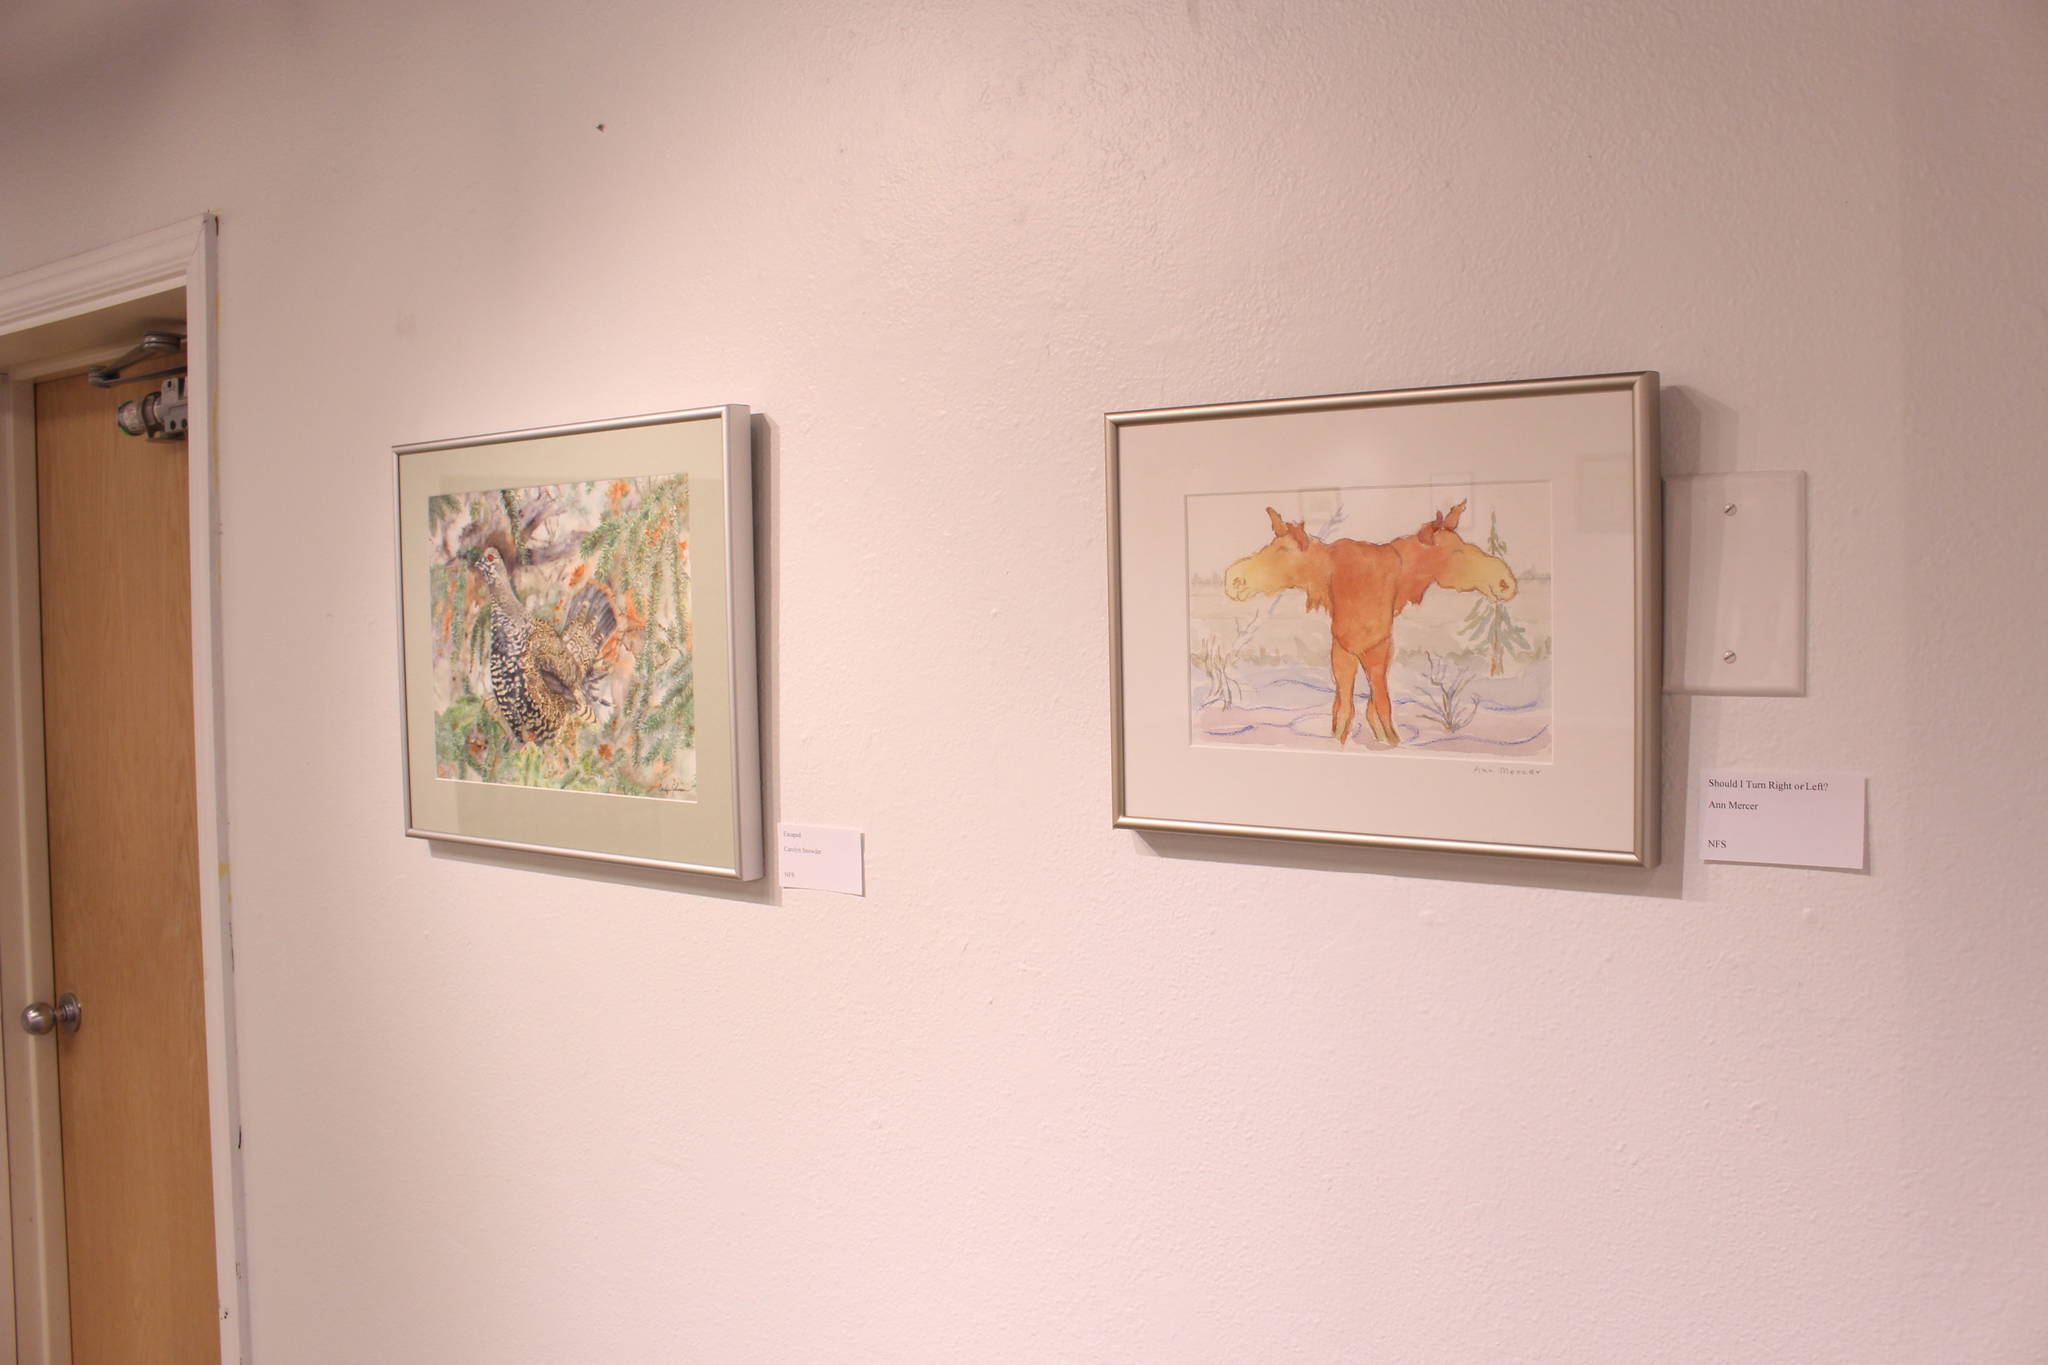 Watercolor paintings by Carolyn Snowder and Ann Mercer are seen on display at the Kenai Fine Art Center in Kenai, Alaska on Feb. 4, 2020. (Photo by Brian Mazurek/Peninsula Clarion)